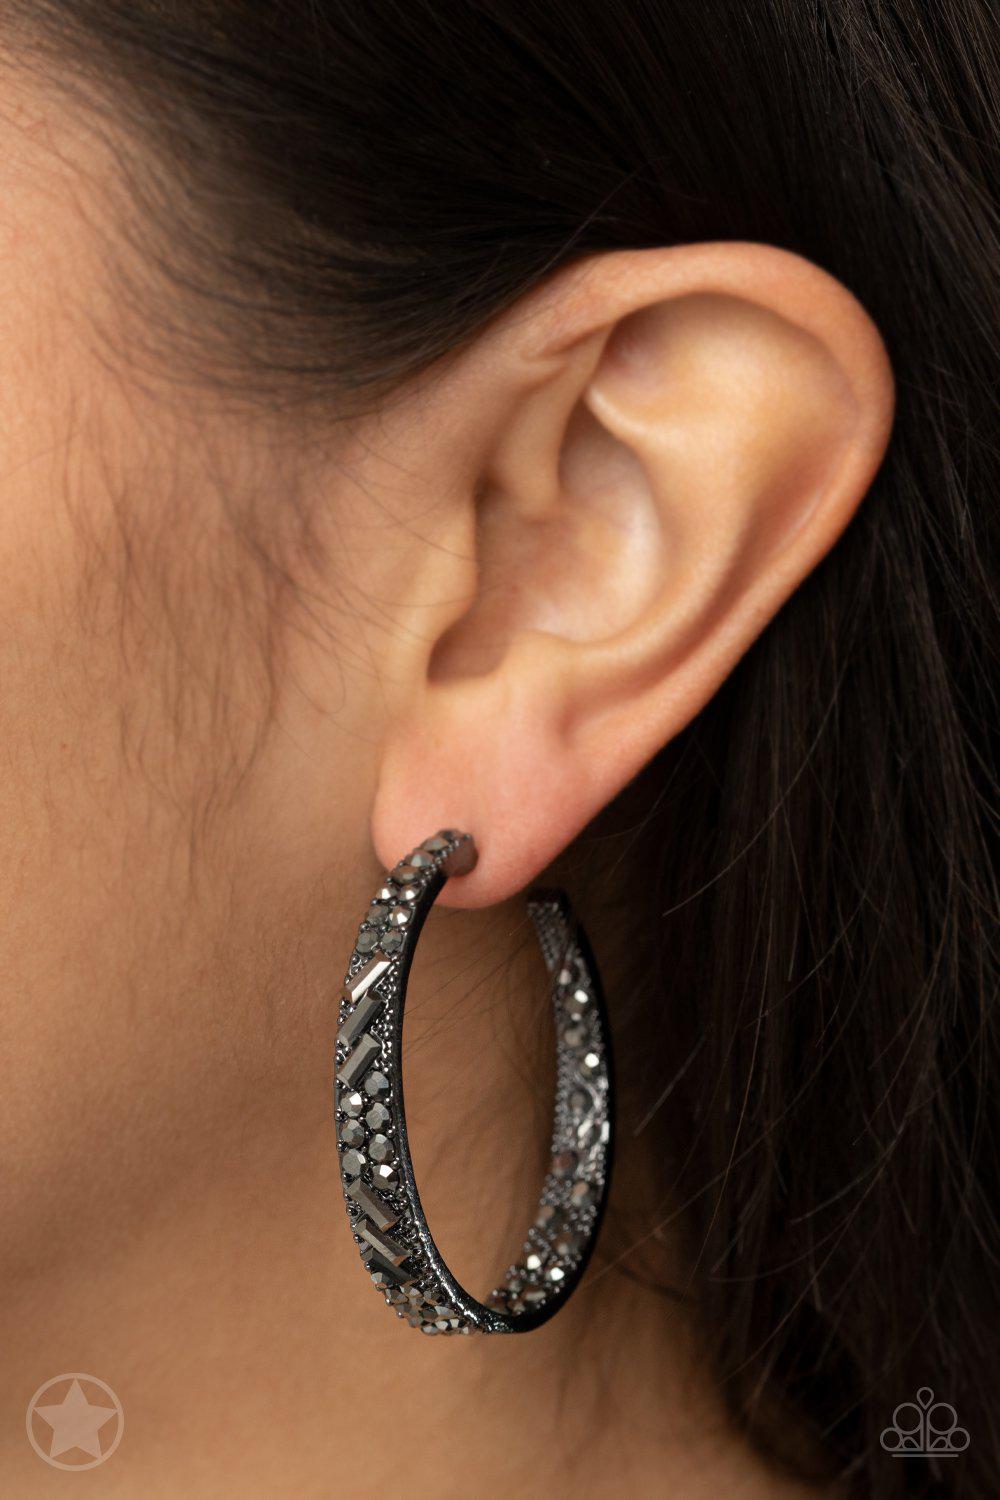 Glitzy By Association Gunmetal Black and Hematite Hoop Earrings - Paparazzi Accessories - model -CarasShop.com - $5 Jewelry by Cara Jewels